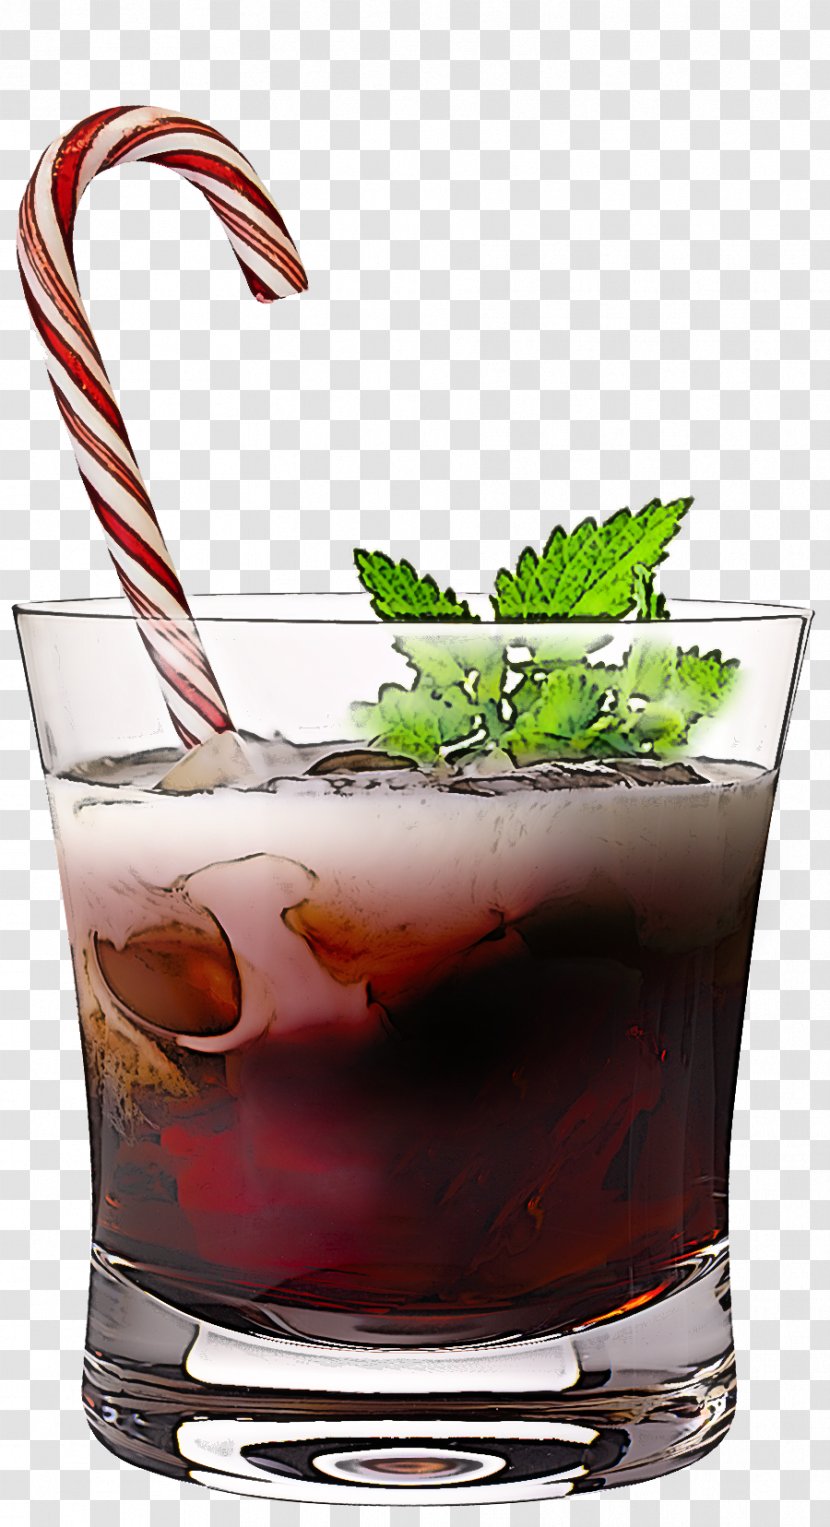 Drink Cocktail Garnish Non-alcoholic Beverage Alcoholic Highball Glass - Nonalcoholic - Distilled Cranberry Juice Transparent PNG